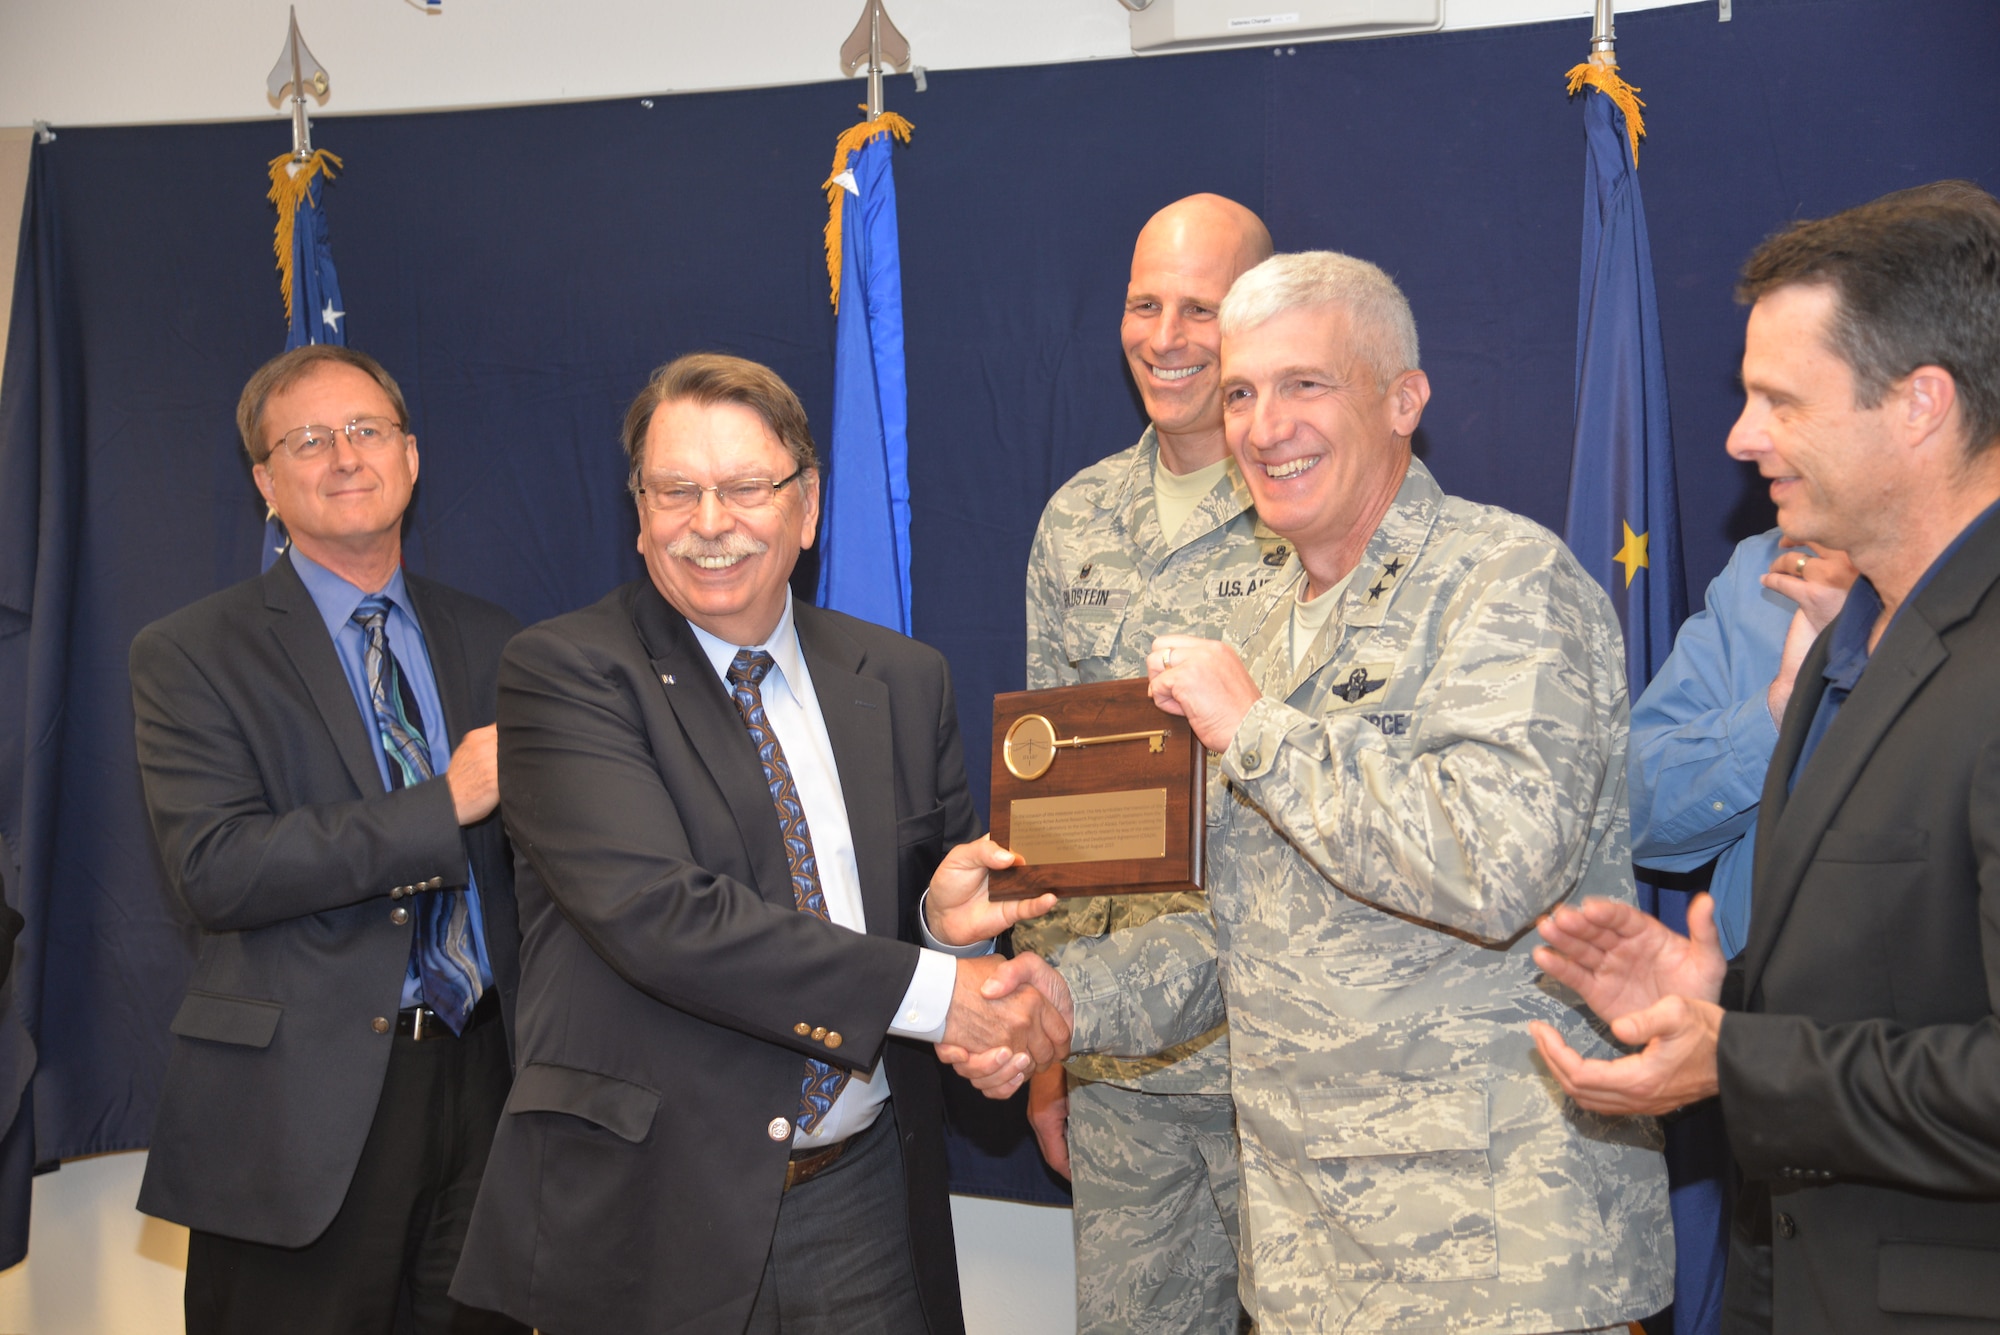 Brian Rogers, University of Alaska-Fairbanks chancellor, accepts the ceremonial key to the High Frequency Active Auroral Research Program, better known as HAARP, in Gakona, Alaska, from Maj. Gen. Thomas Masiello, Air Force Research Laboratory commander, August 11. The ionospheric research facility was transferred from the Air Force to the university to allow for continued exploration via a land-use cooperative research and development agreement. (Photo by Tommie Baker)